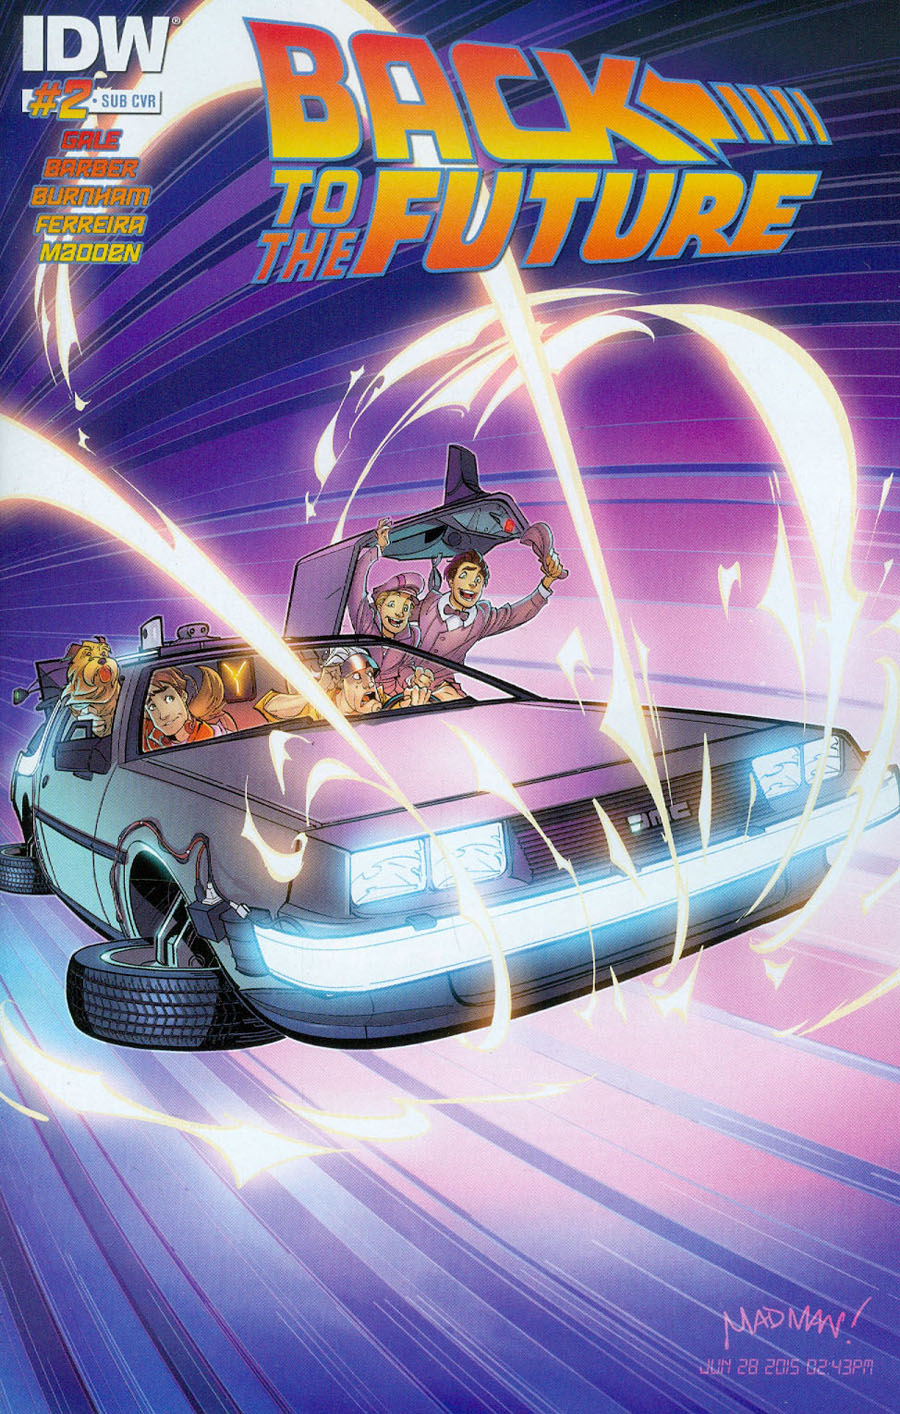 Back To The Future Vol 2 #2 Cover C Variant Chris Madden Subscription Cover